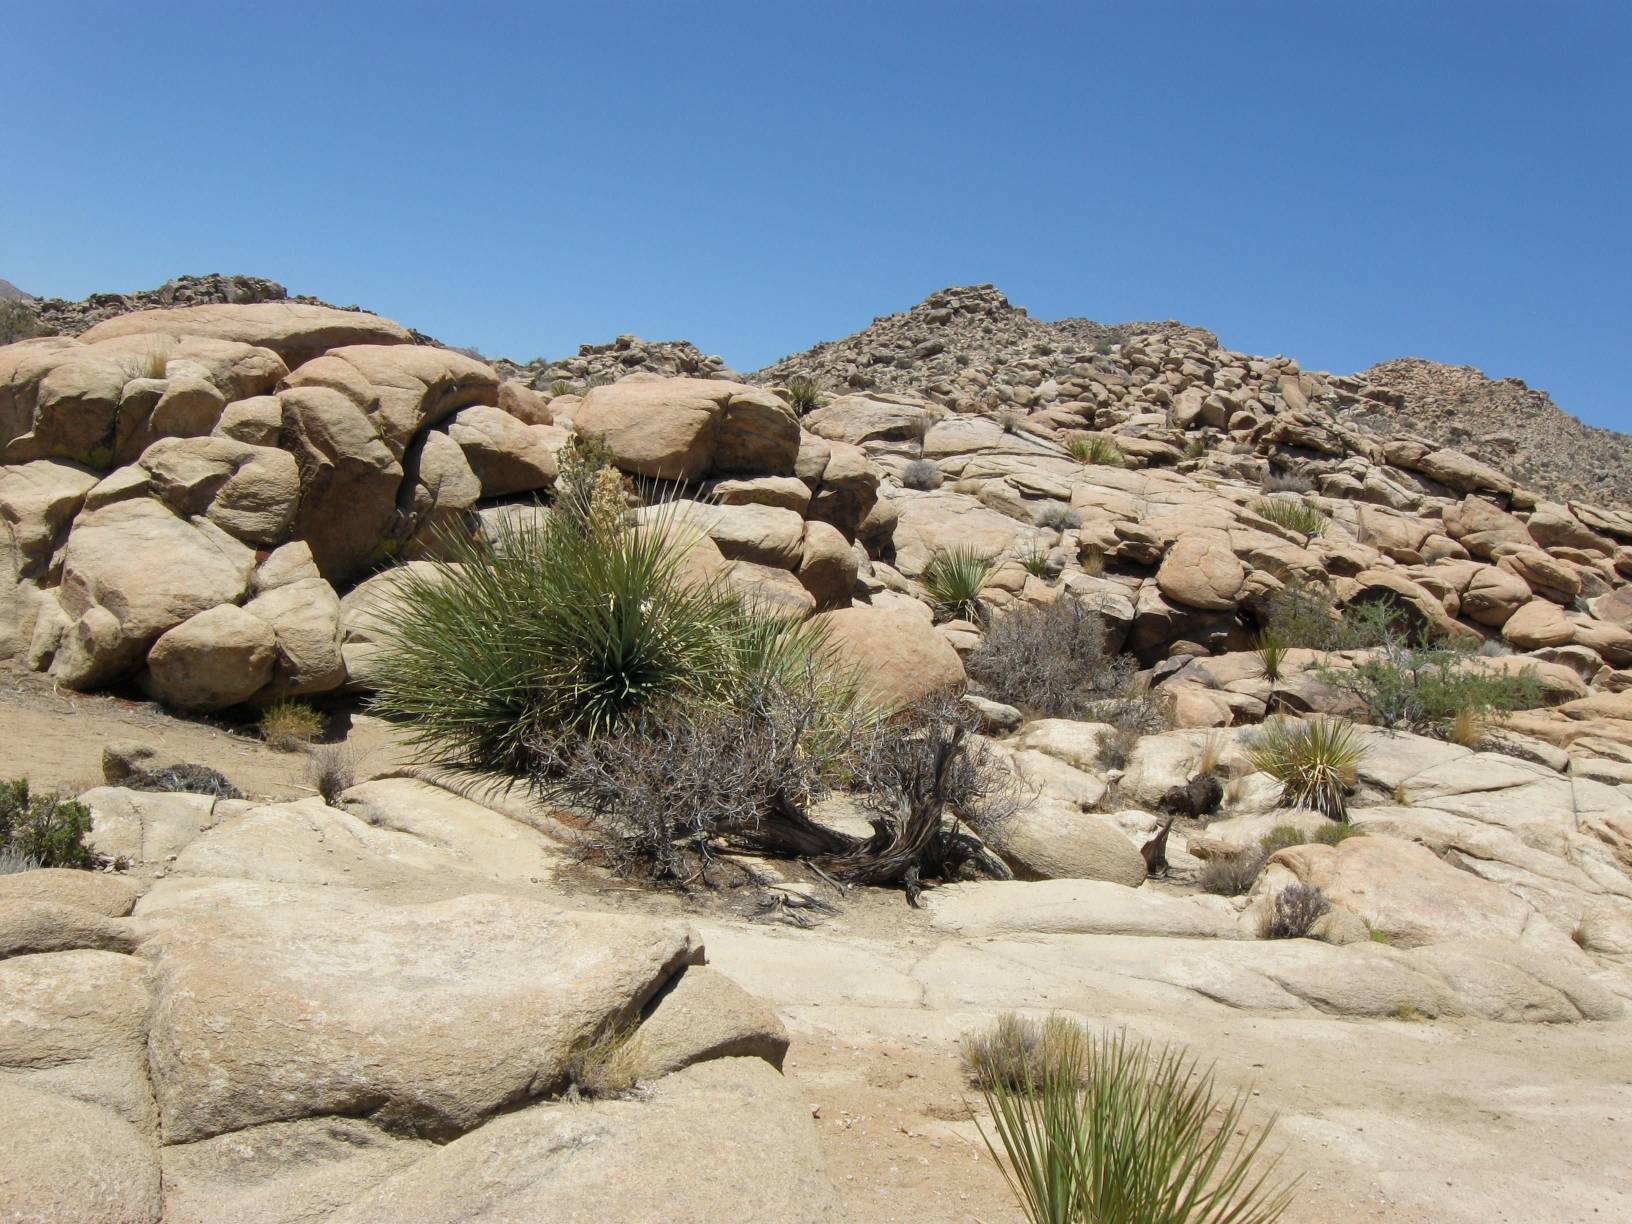 Image: Heaps of rocks -- another staple of the Joshua Tree National Park landscape